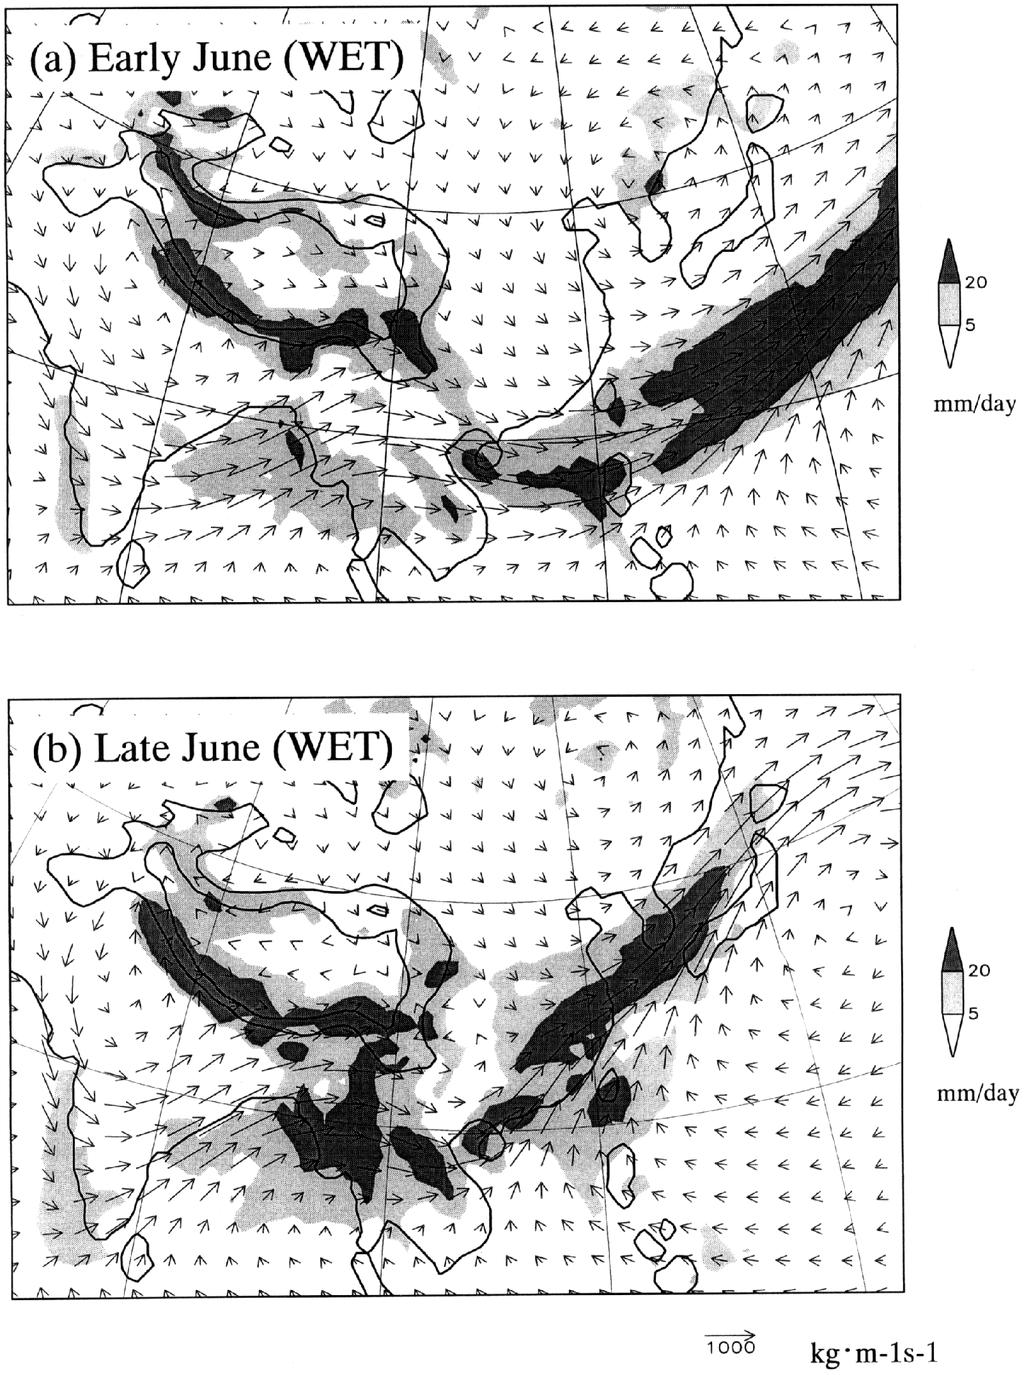 Effects of Soil Moisture of the Asian Continent upon the Baiu Front 107 Tibetan Plateau on the Baiu front. The precipitation and the water vapor transport in early and late June are shown in Figs.